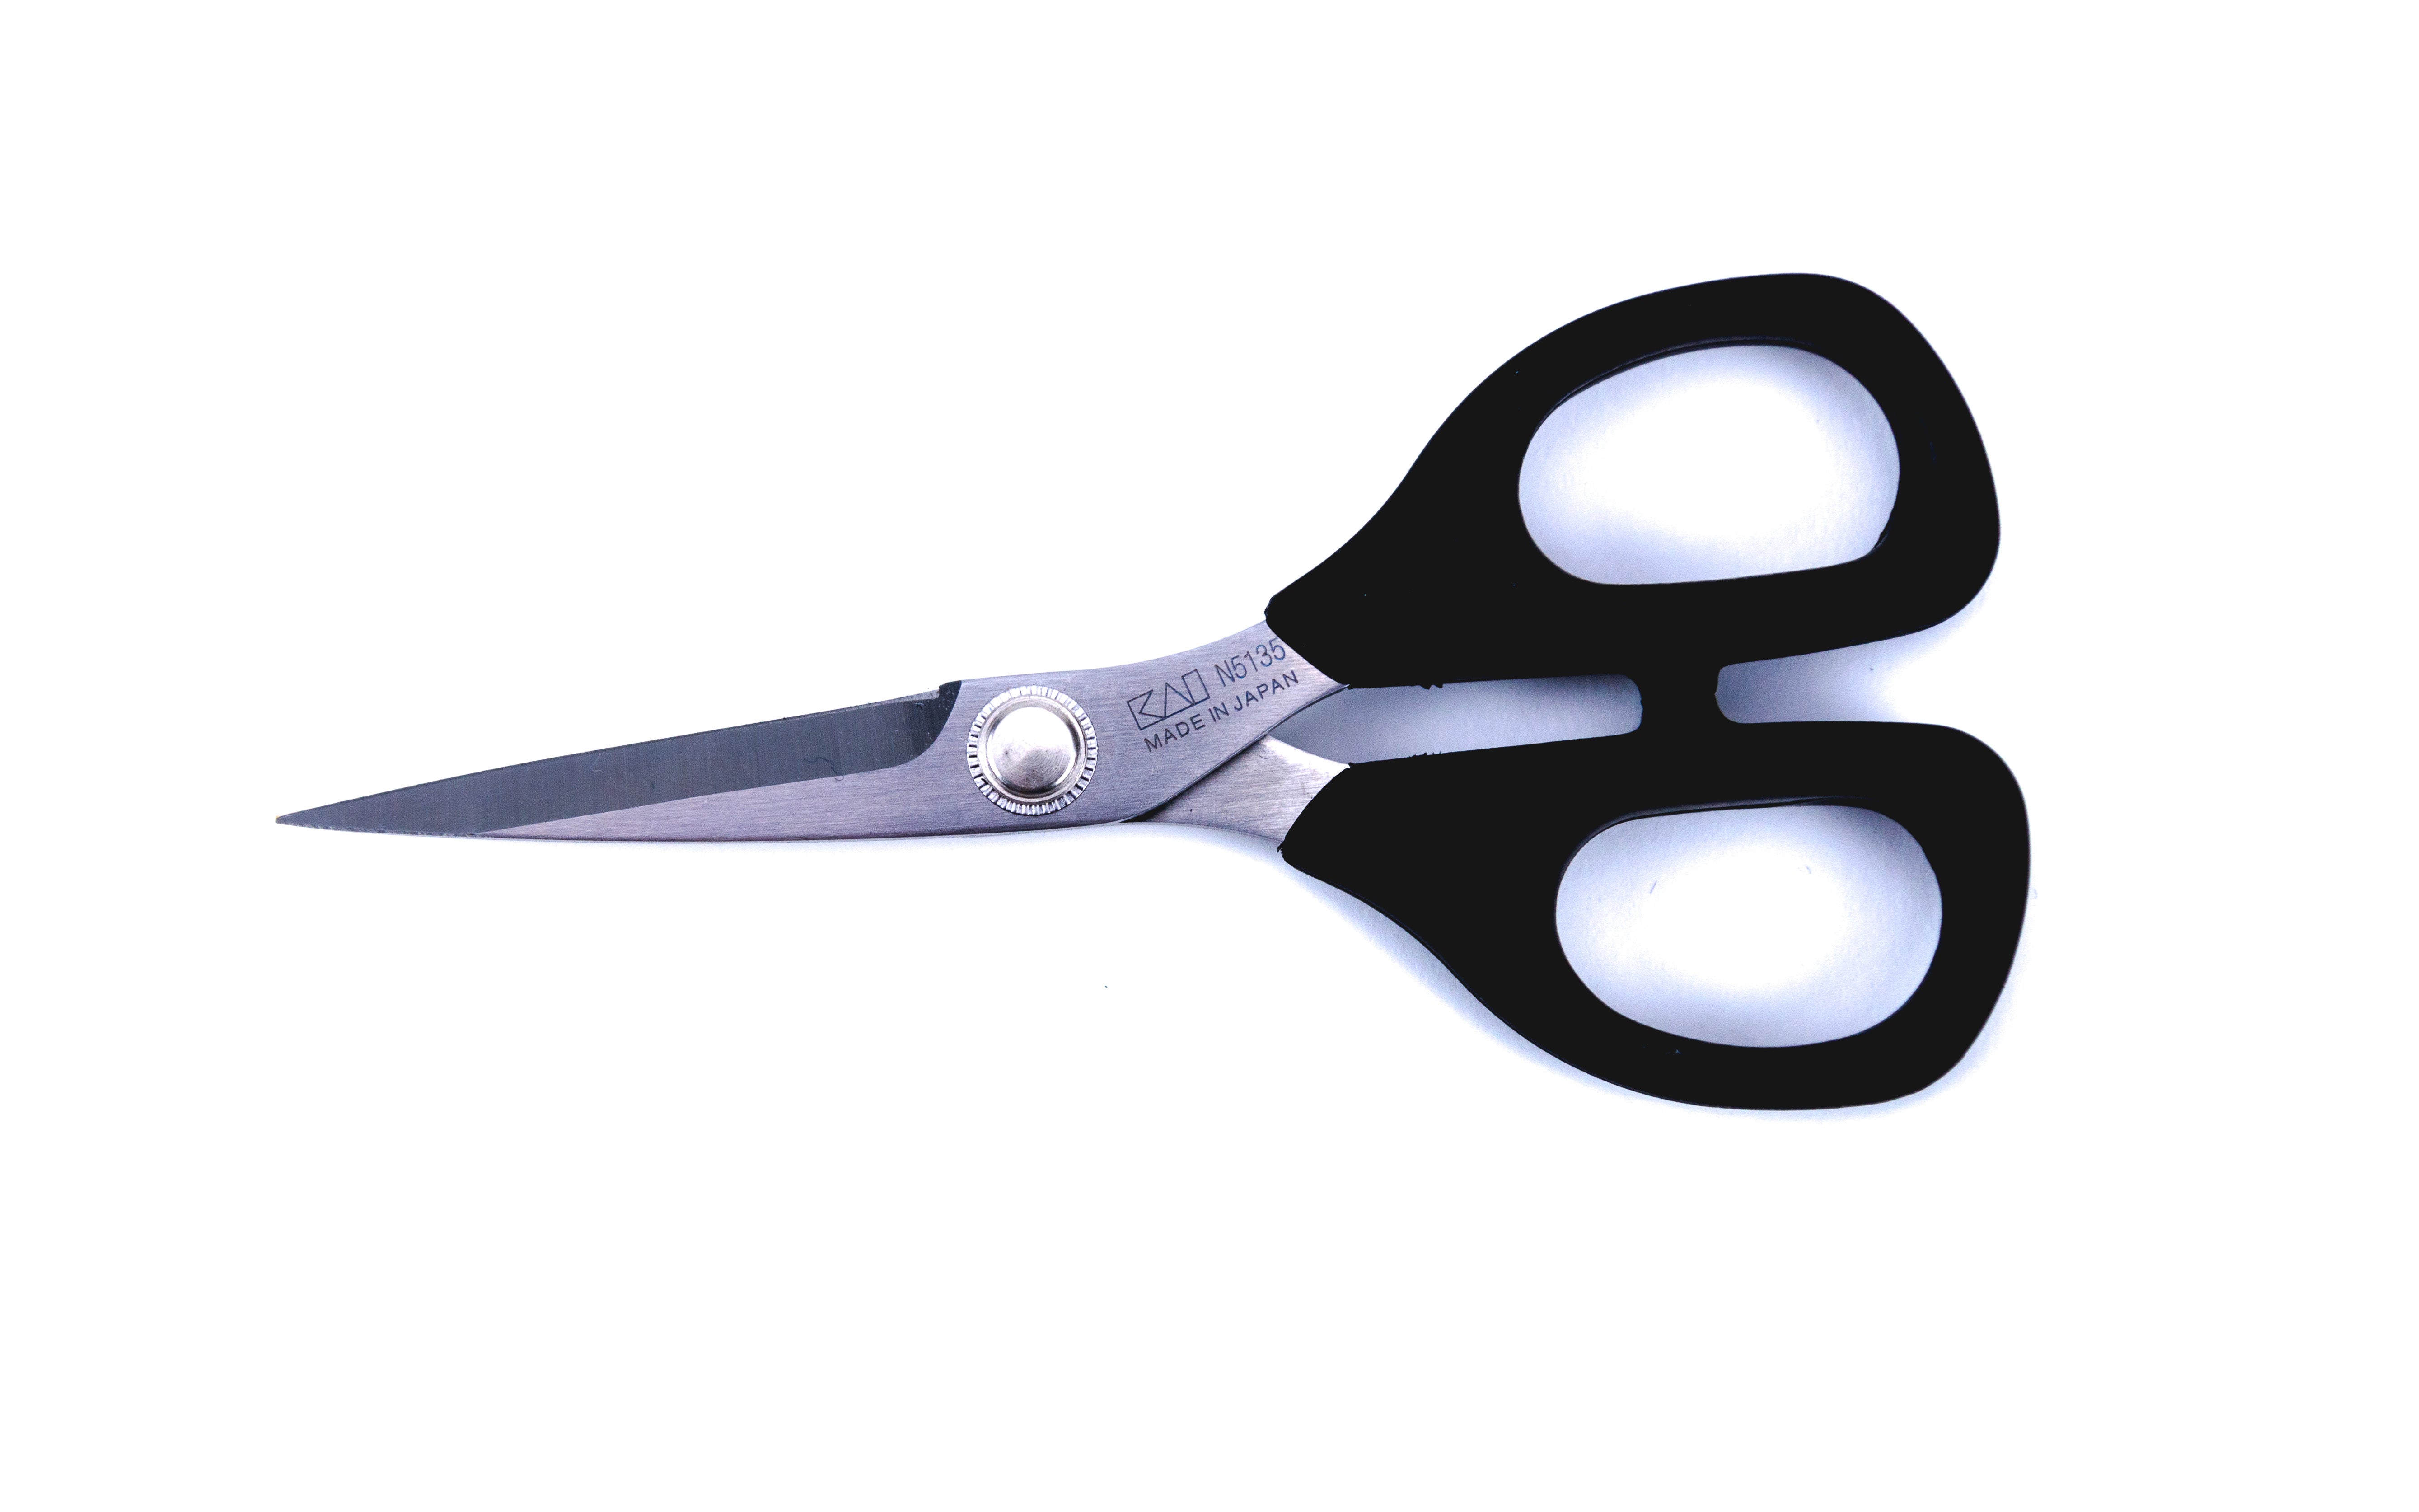 5 Blunt-Tip Double Curved Embroidery Scissors – Children's Corner Store